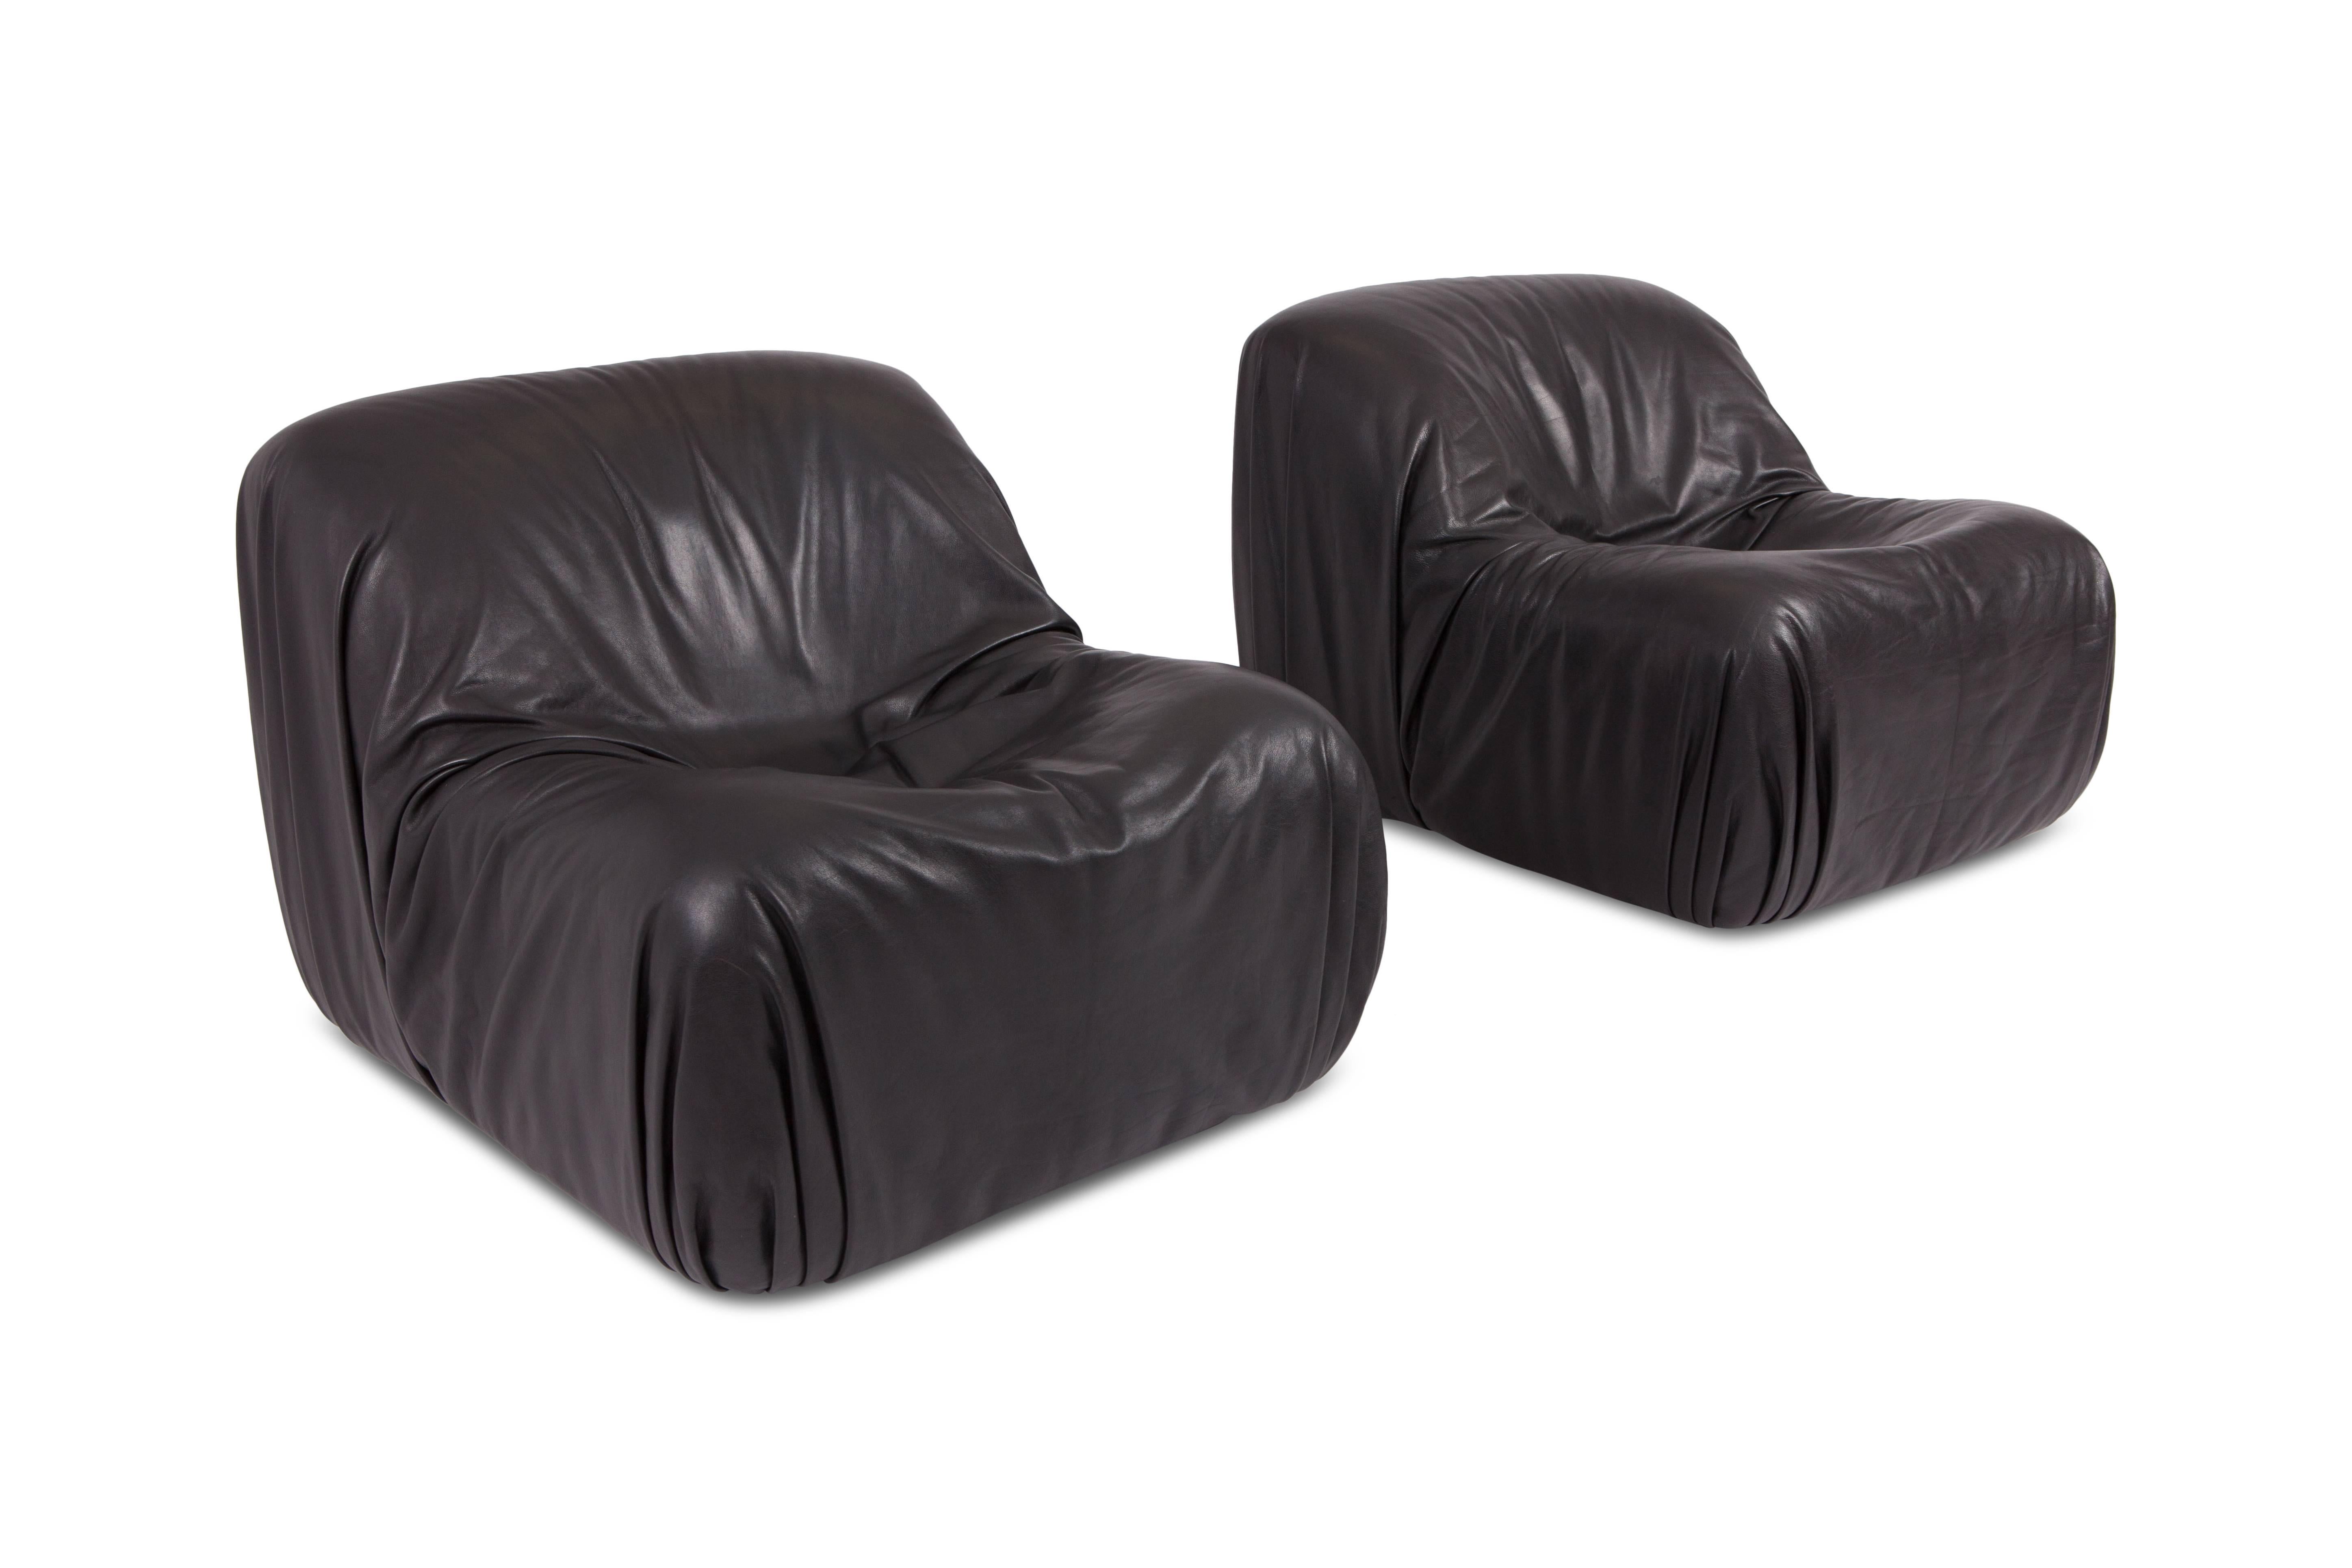 Set of two comfortable DS 41 lounge chairs by De Sede in high quality thick black leather, Switzerland 1970s. De Sede is now well know for making high end quality sofa’s and chairs,
with many icon’s written on their name.

The upholstery is made